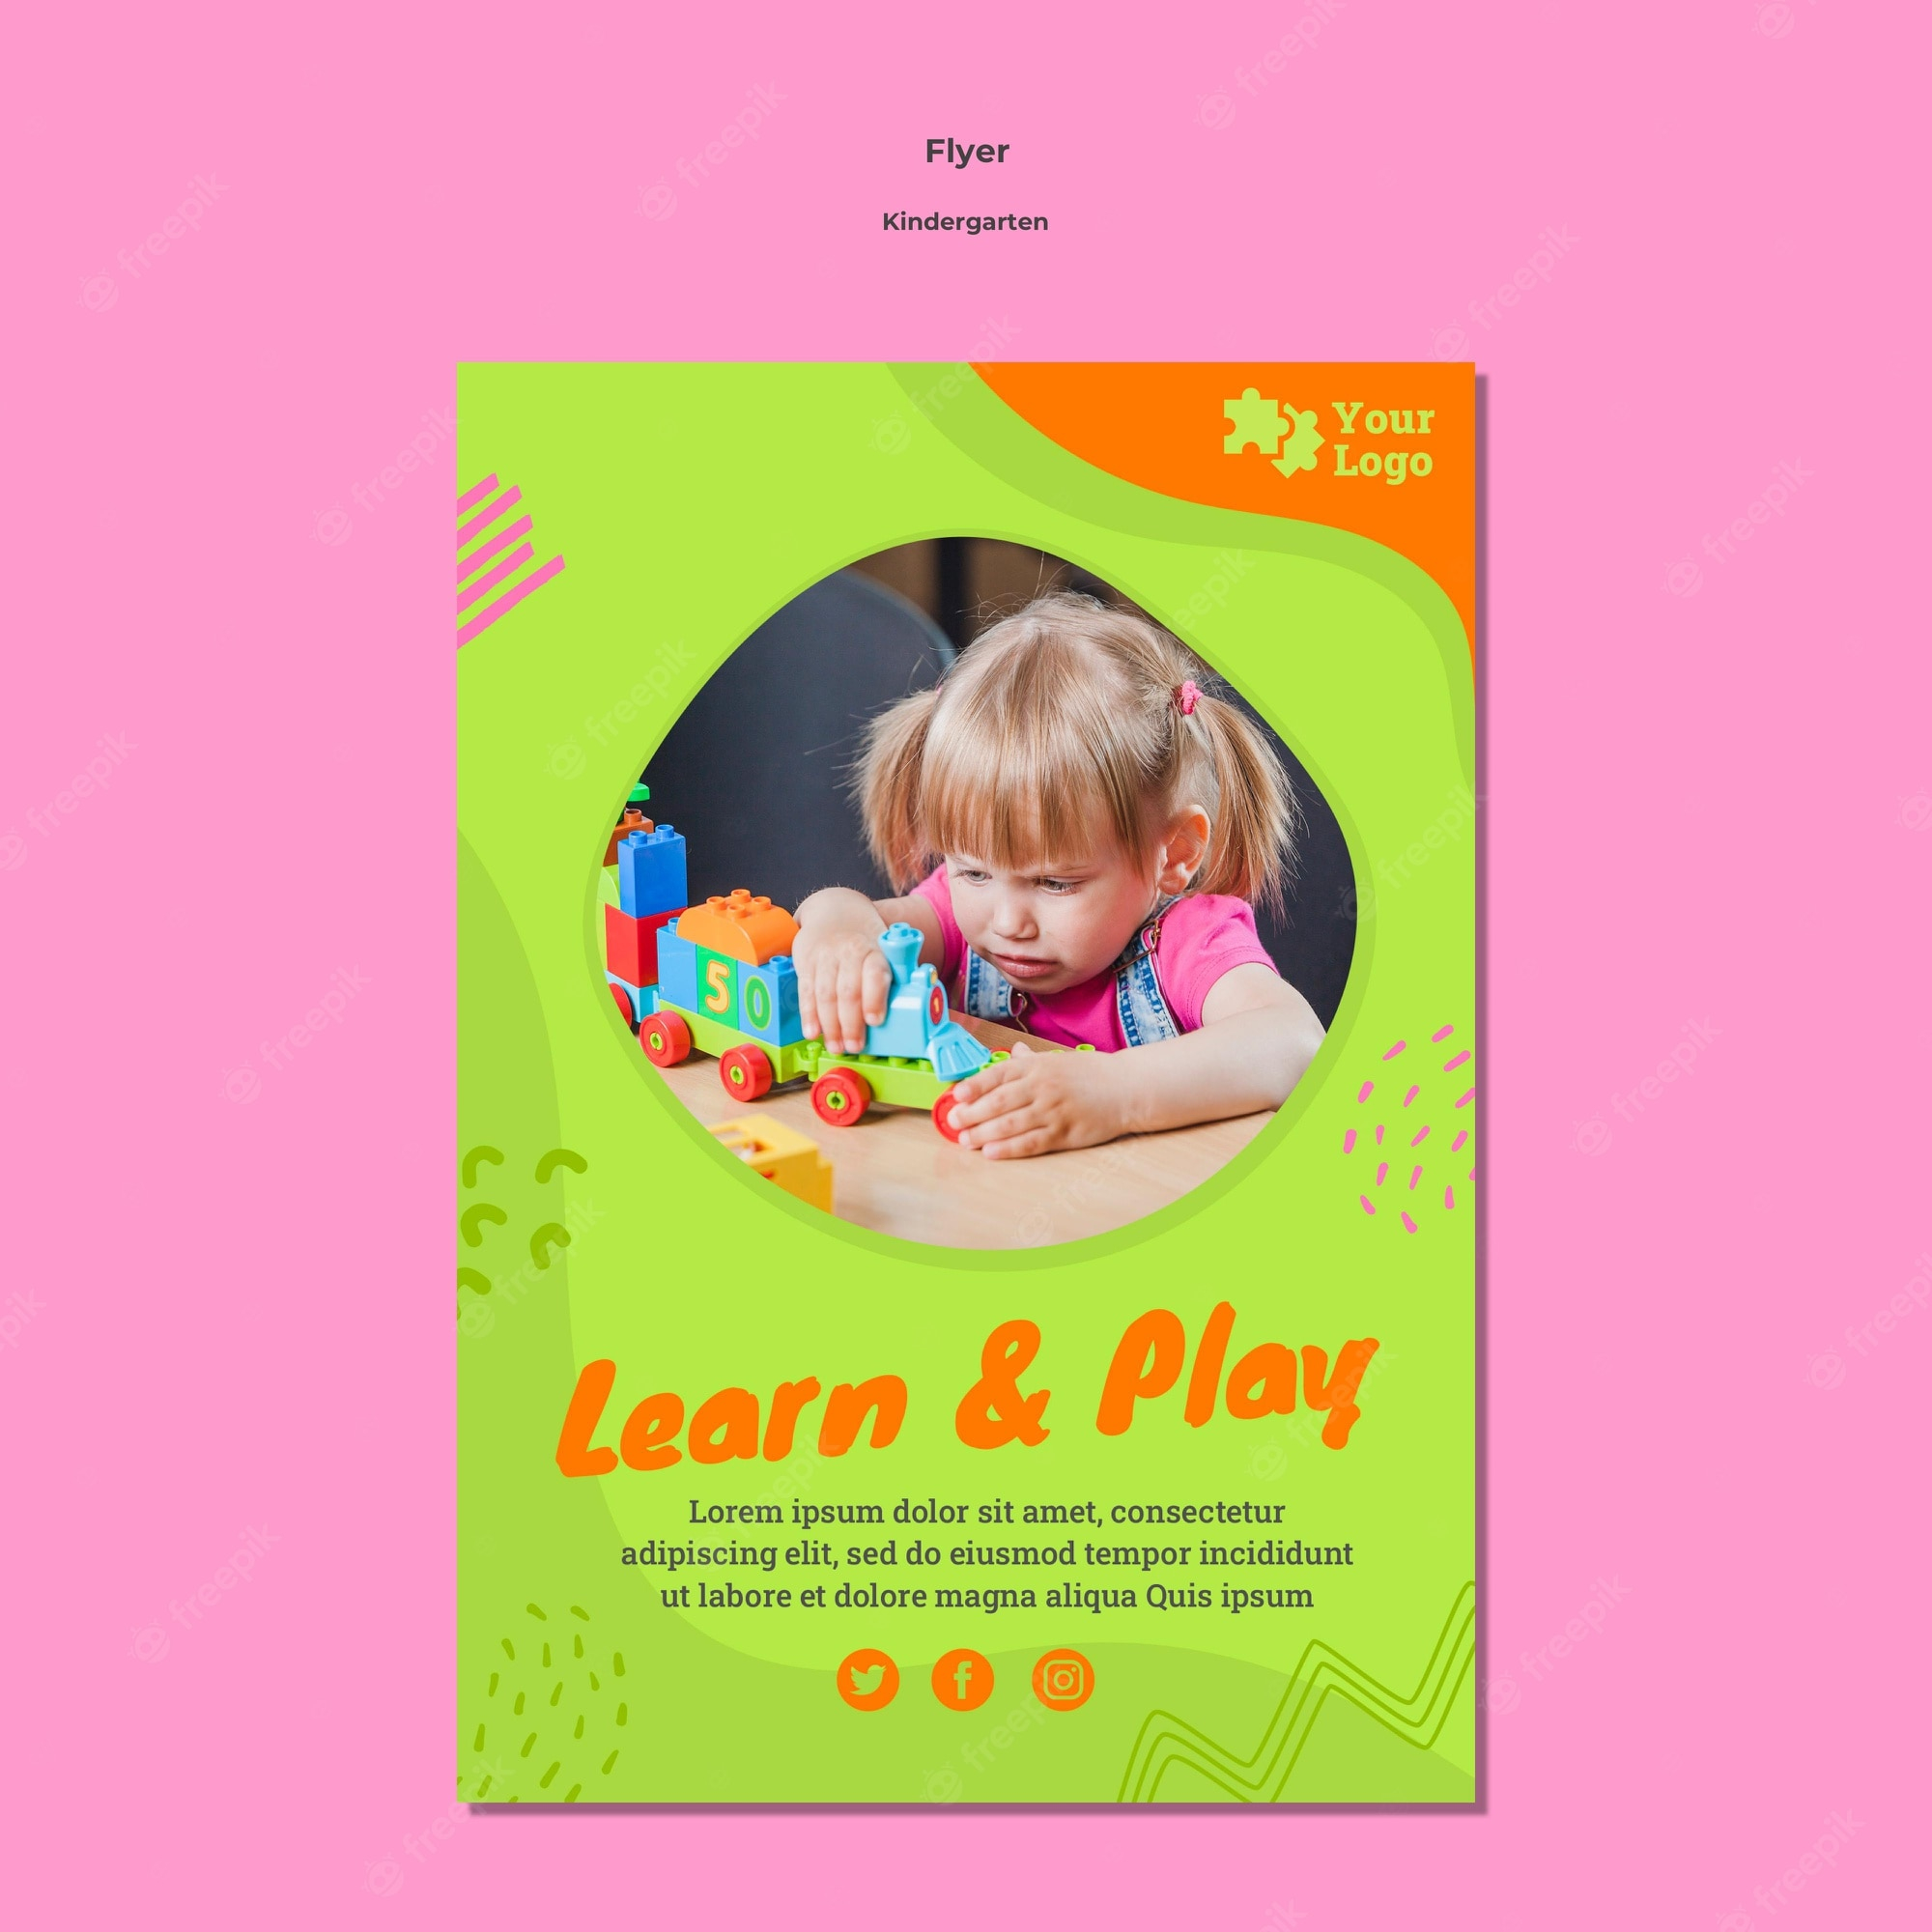 Preschool Flyer PSD, 10+ High Quality Free PSD Templates for Download